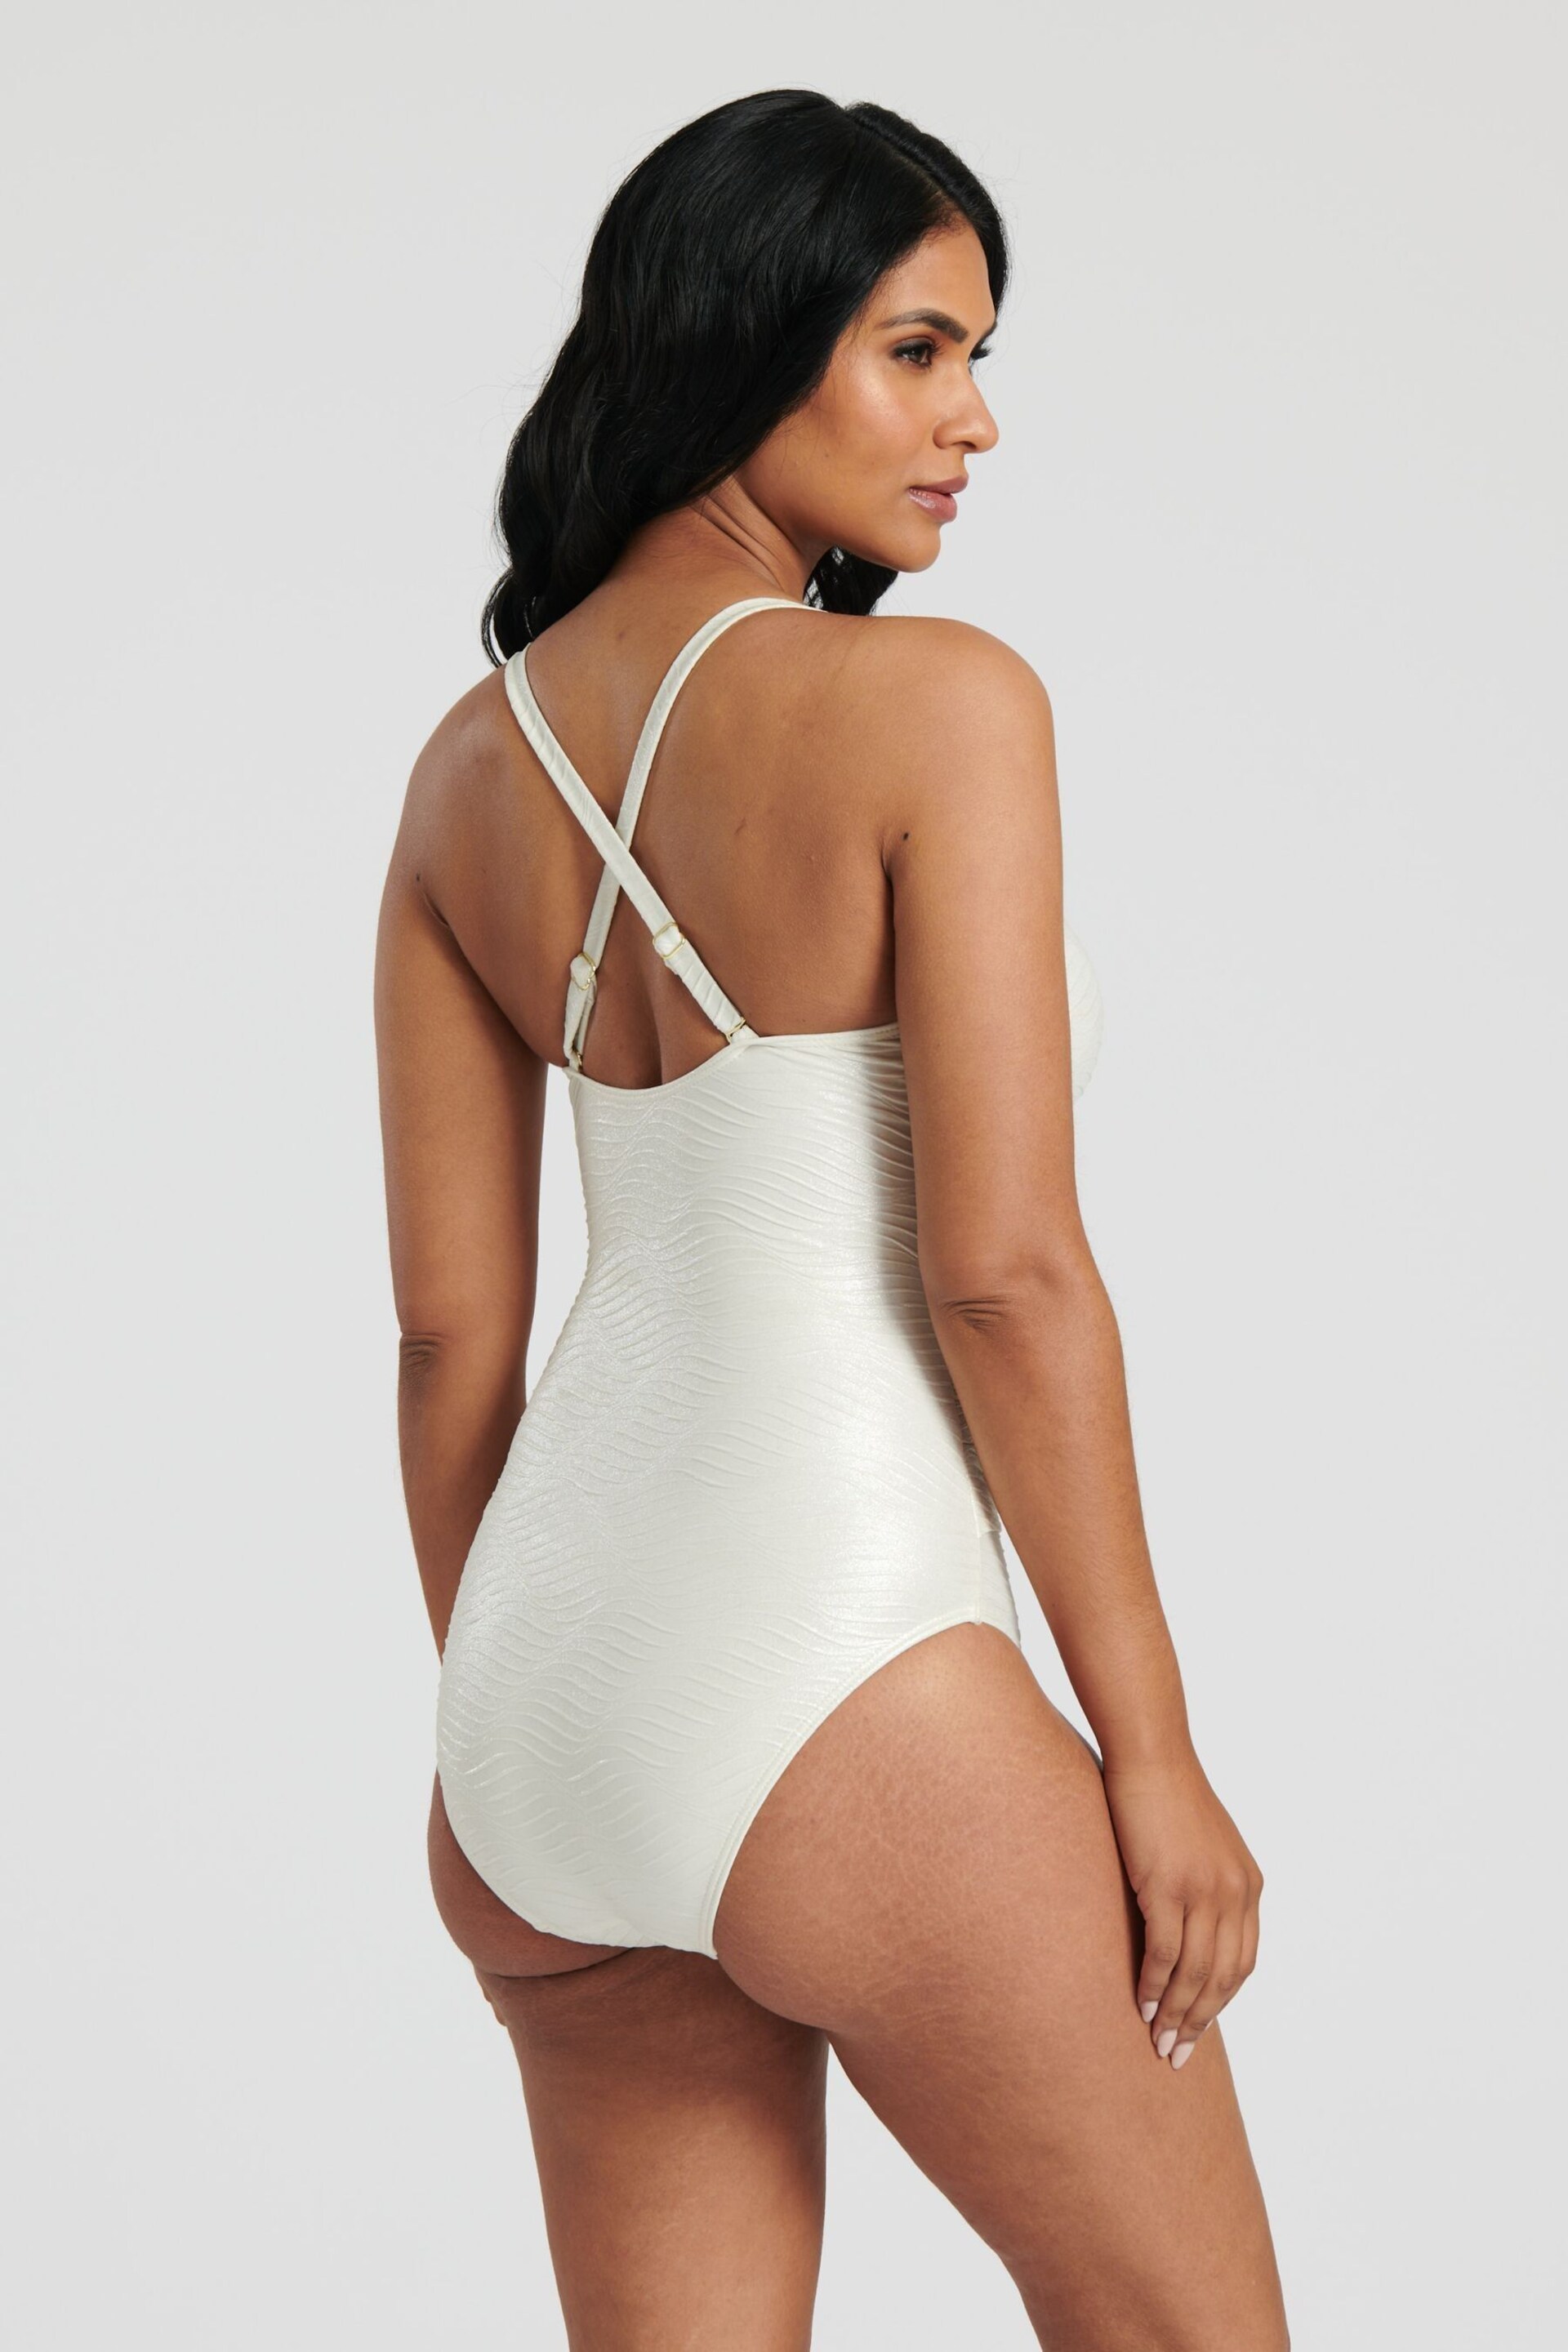 South Beach Cream Shimmer Texture Tummy Control Swimsuit With Fixed Cups - Image 2 of 5